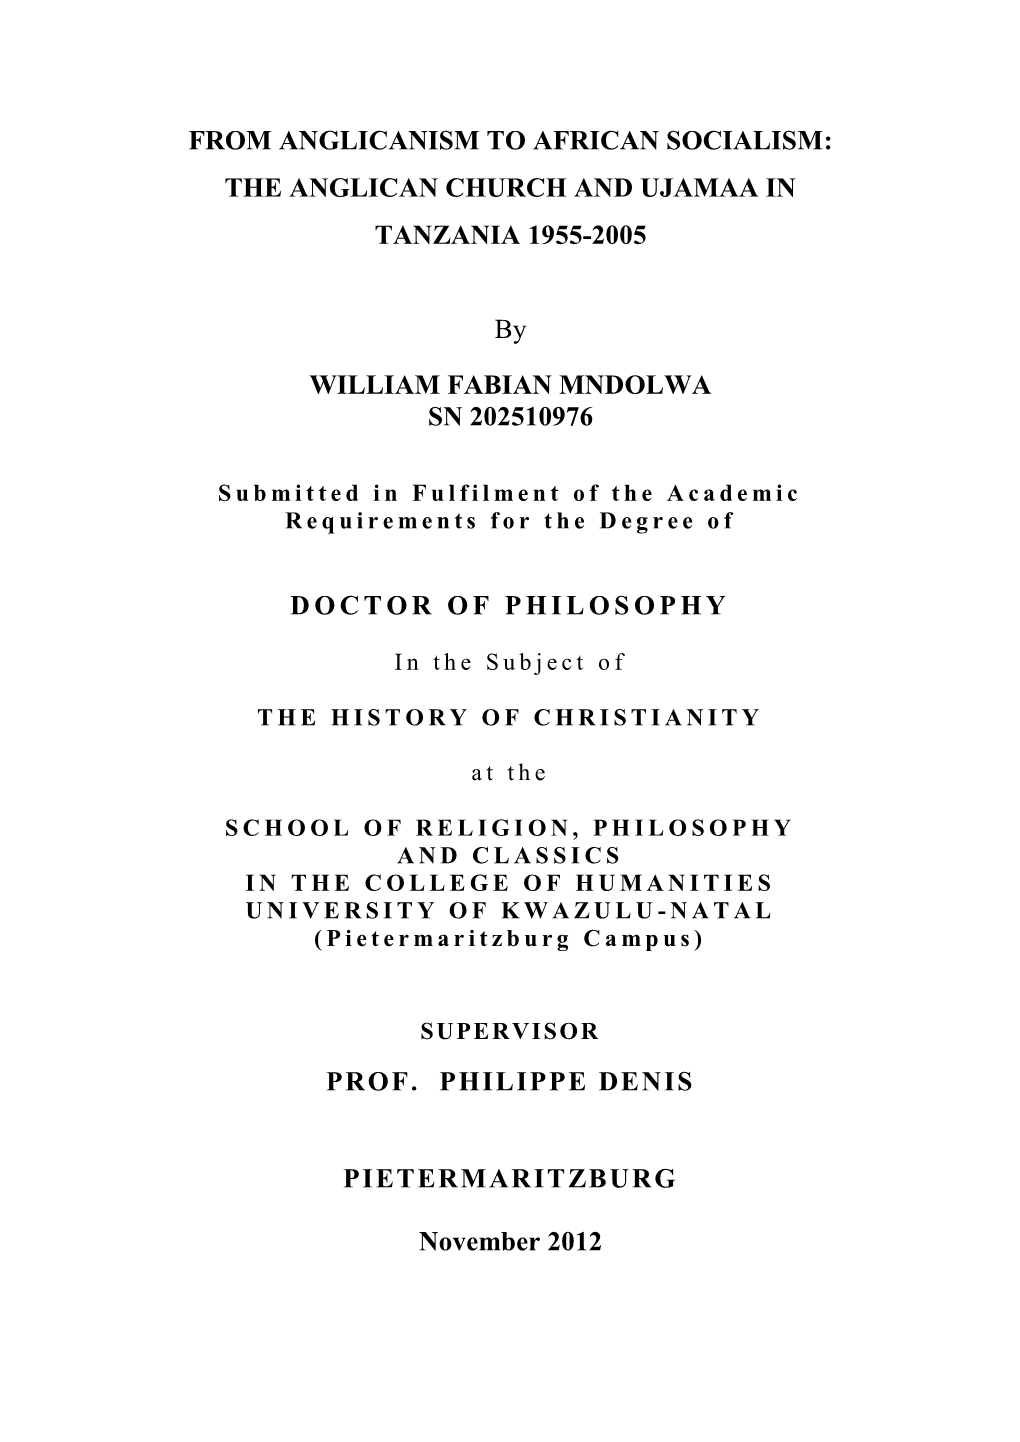 FROM ANGLICANISM to AFRICAN SOCIALISM: the ANGLICAN CHURCH and UJAMAA in TANZANIA 1955-2005 by WILLIAM FABIAN MNDOLWA SN 2025109